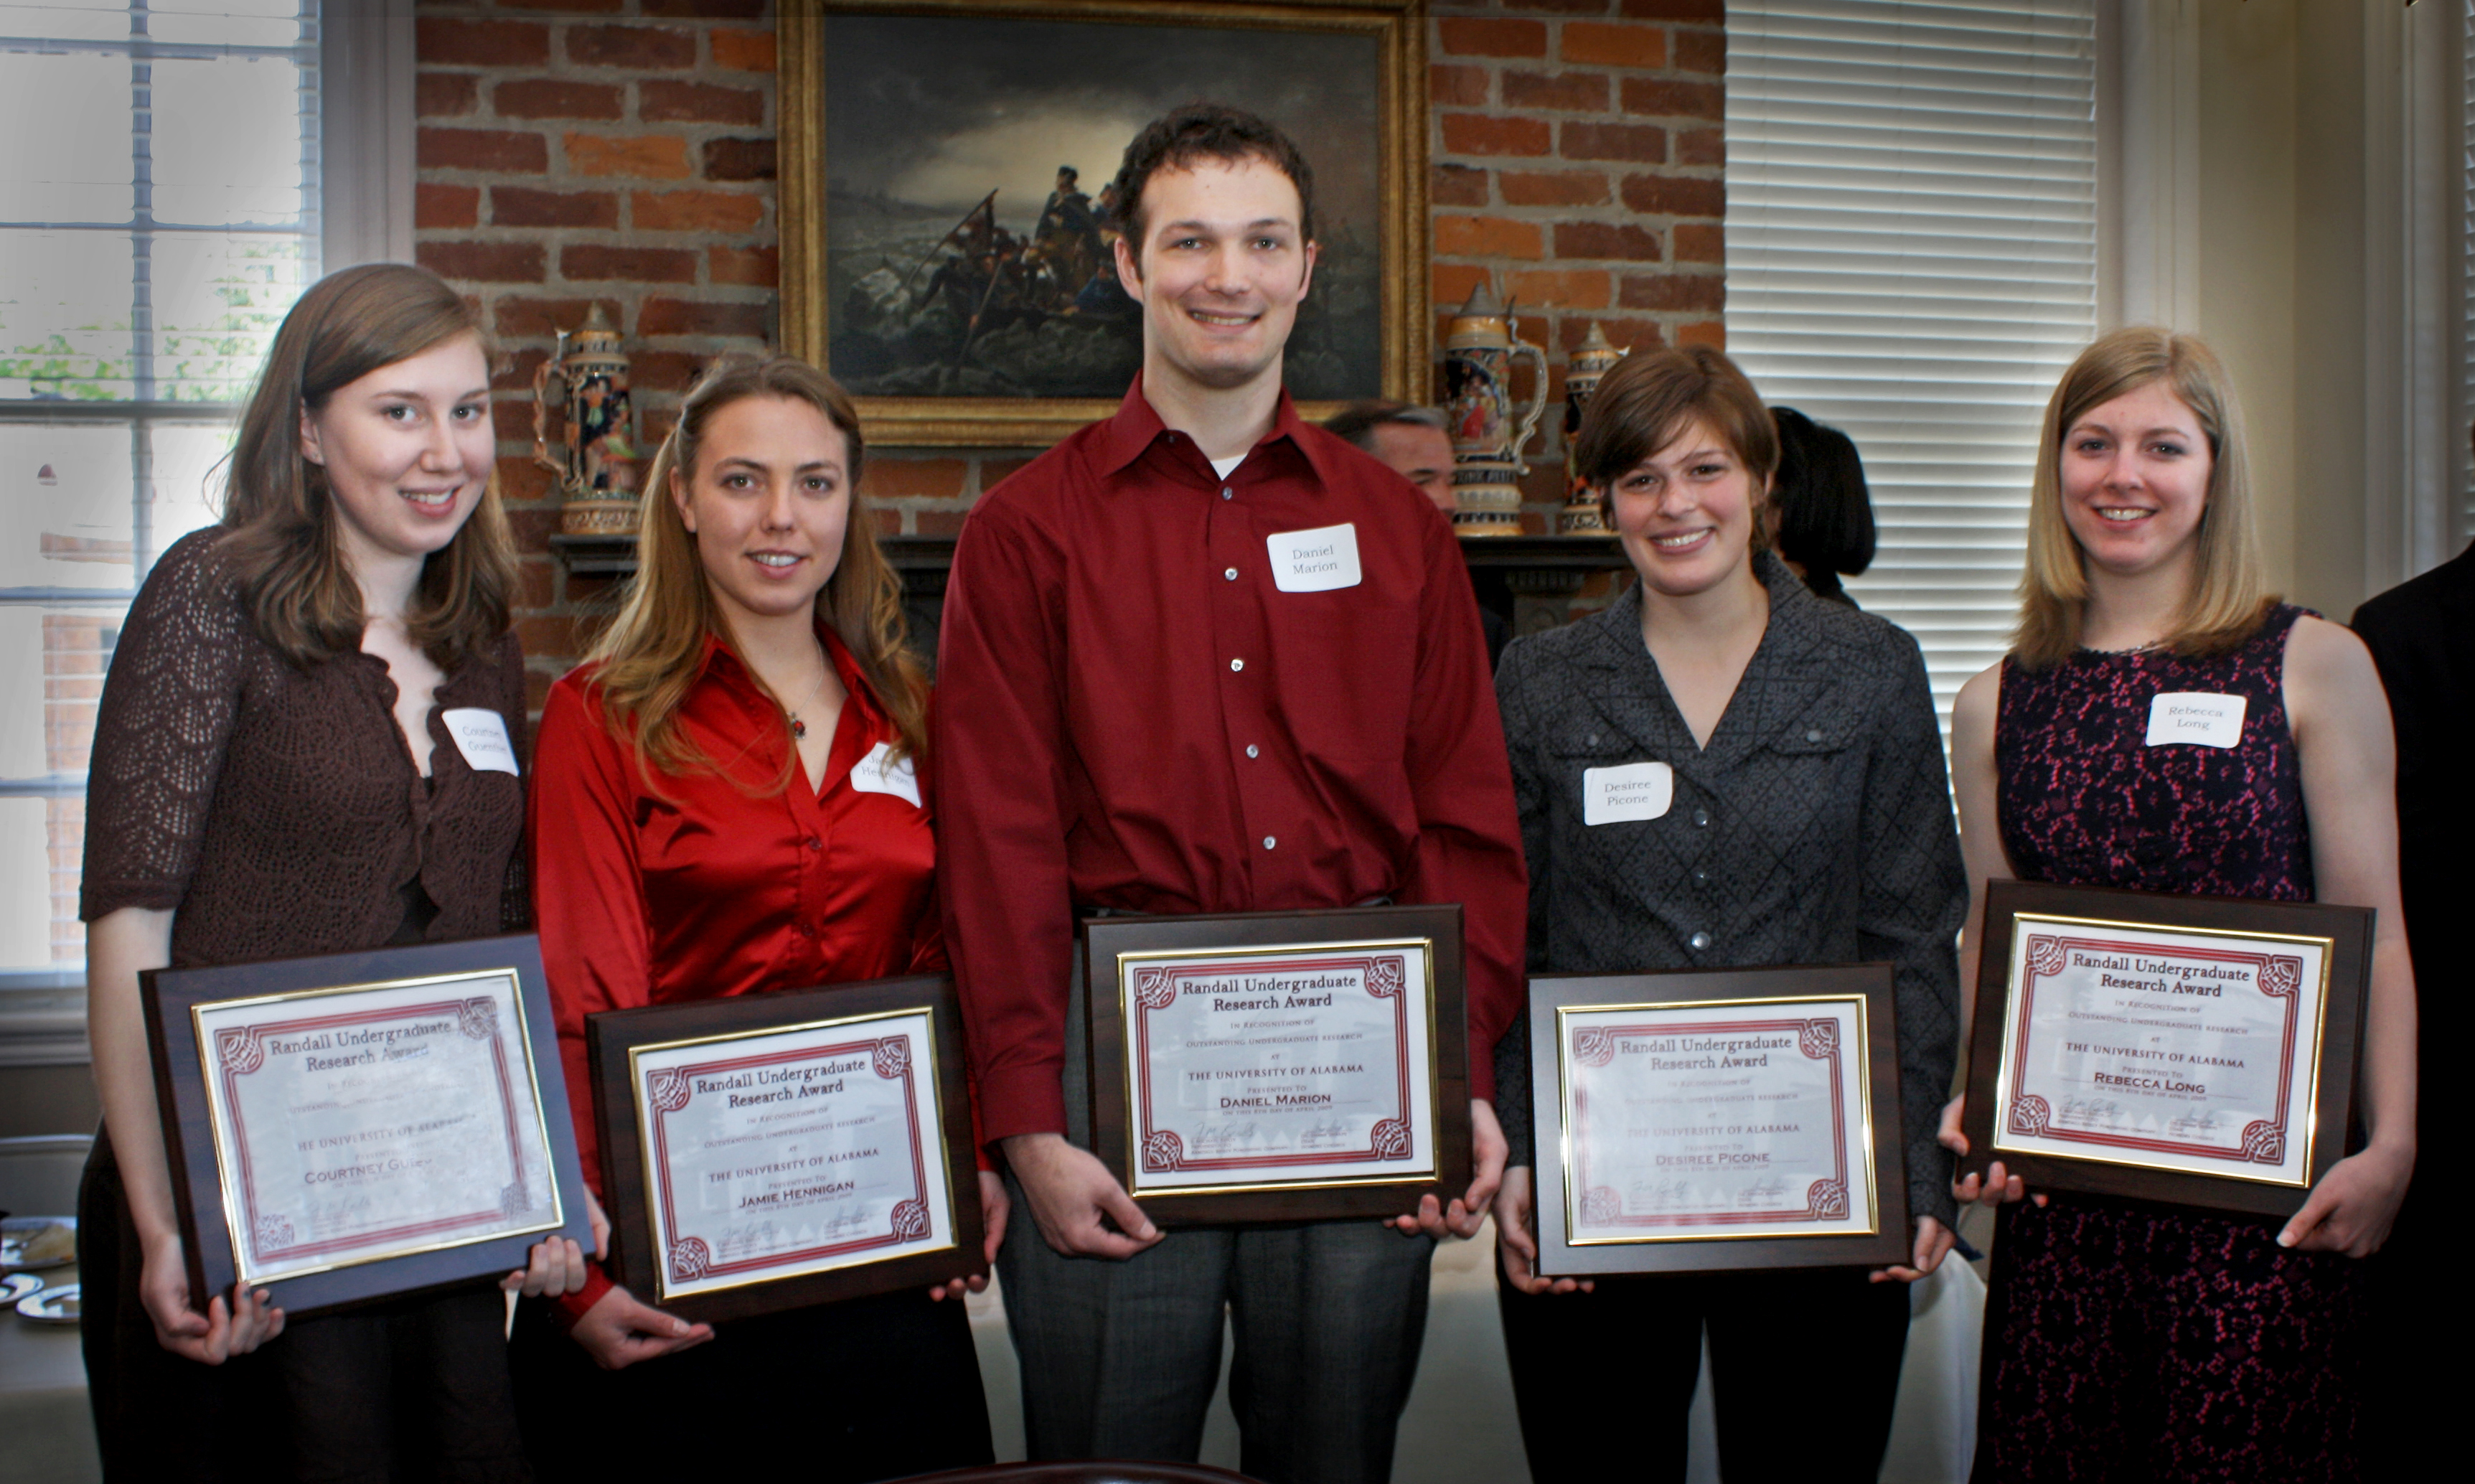 Story Image - Research award winners with certificates